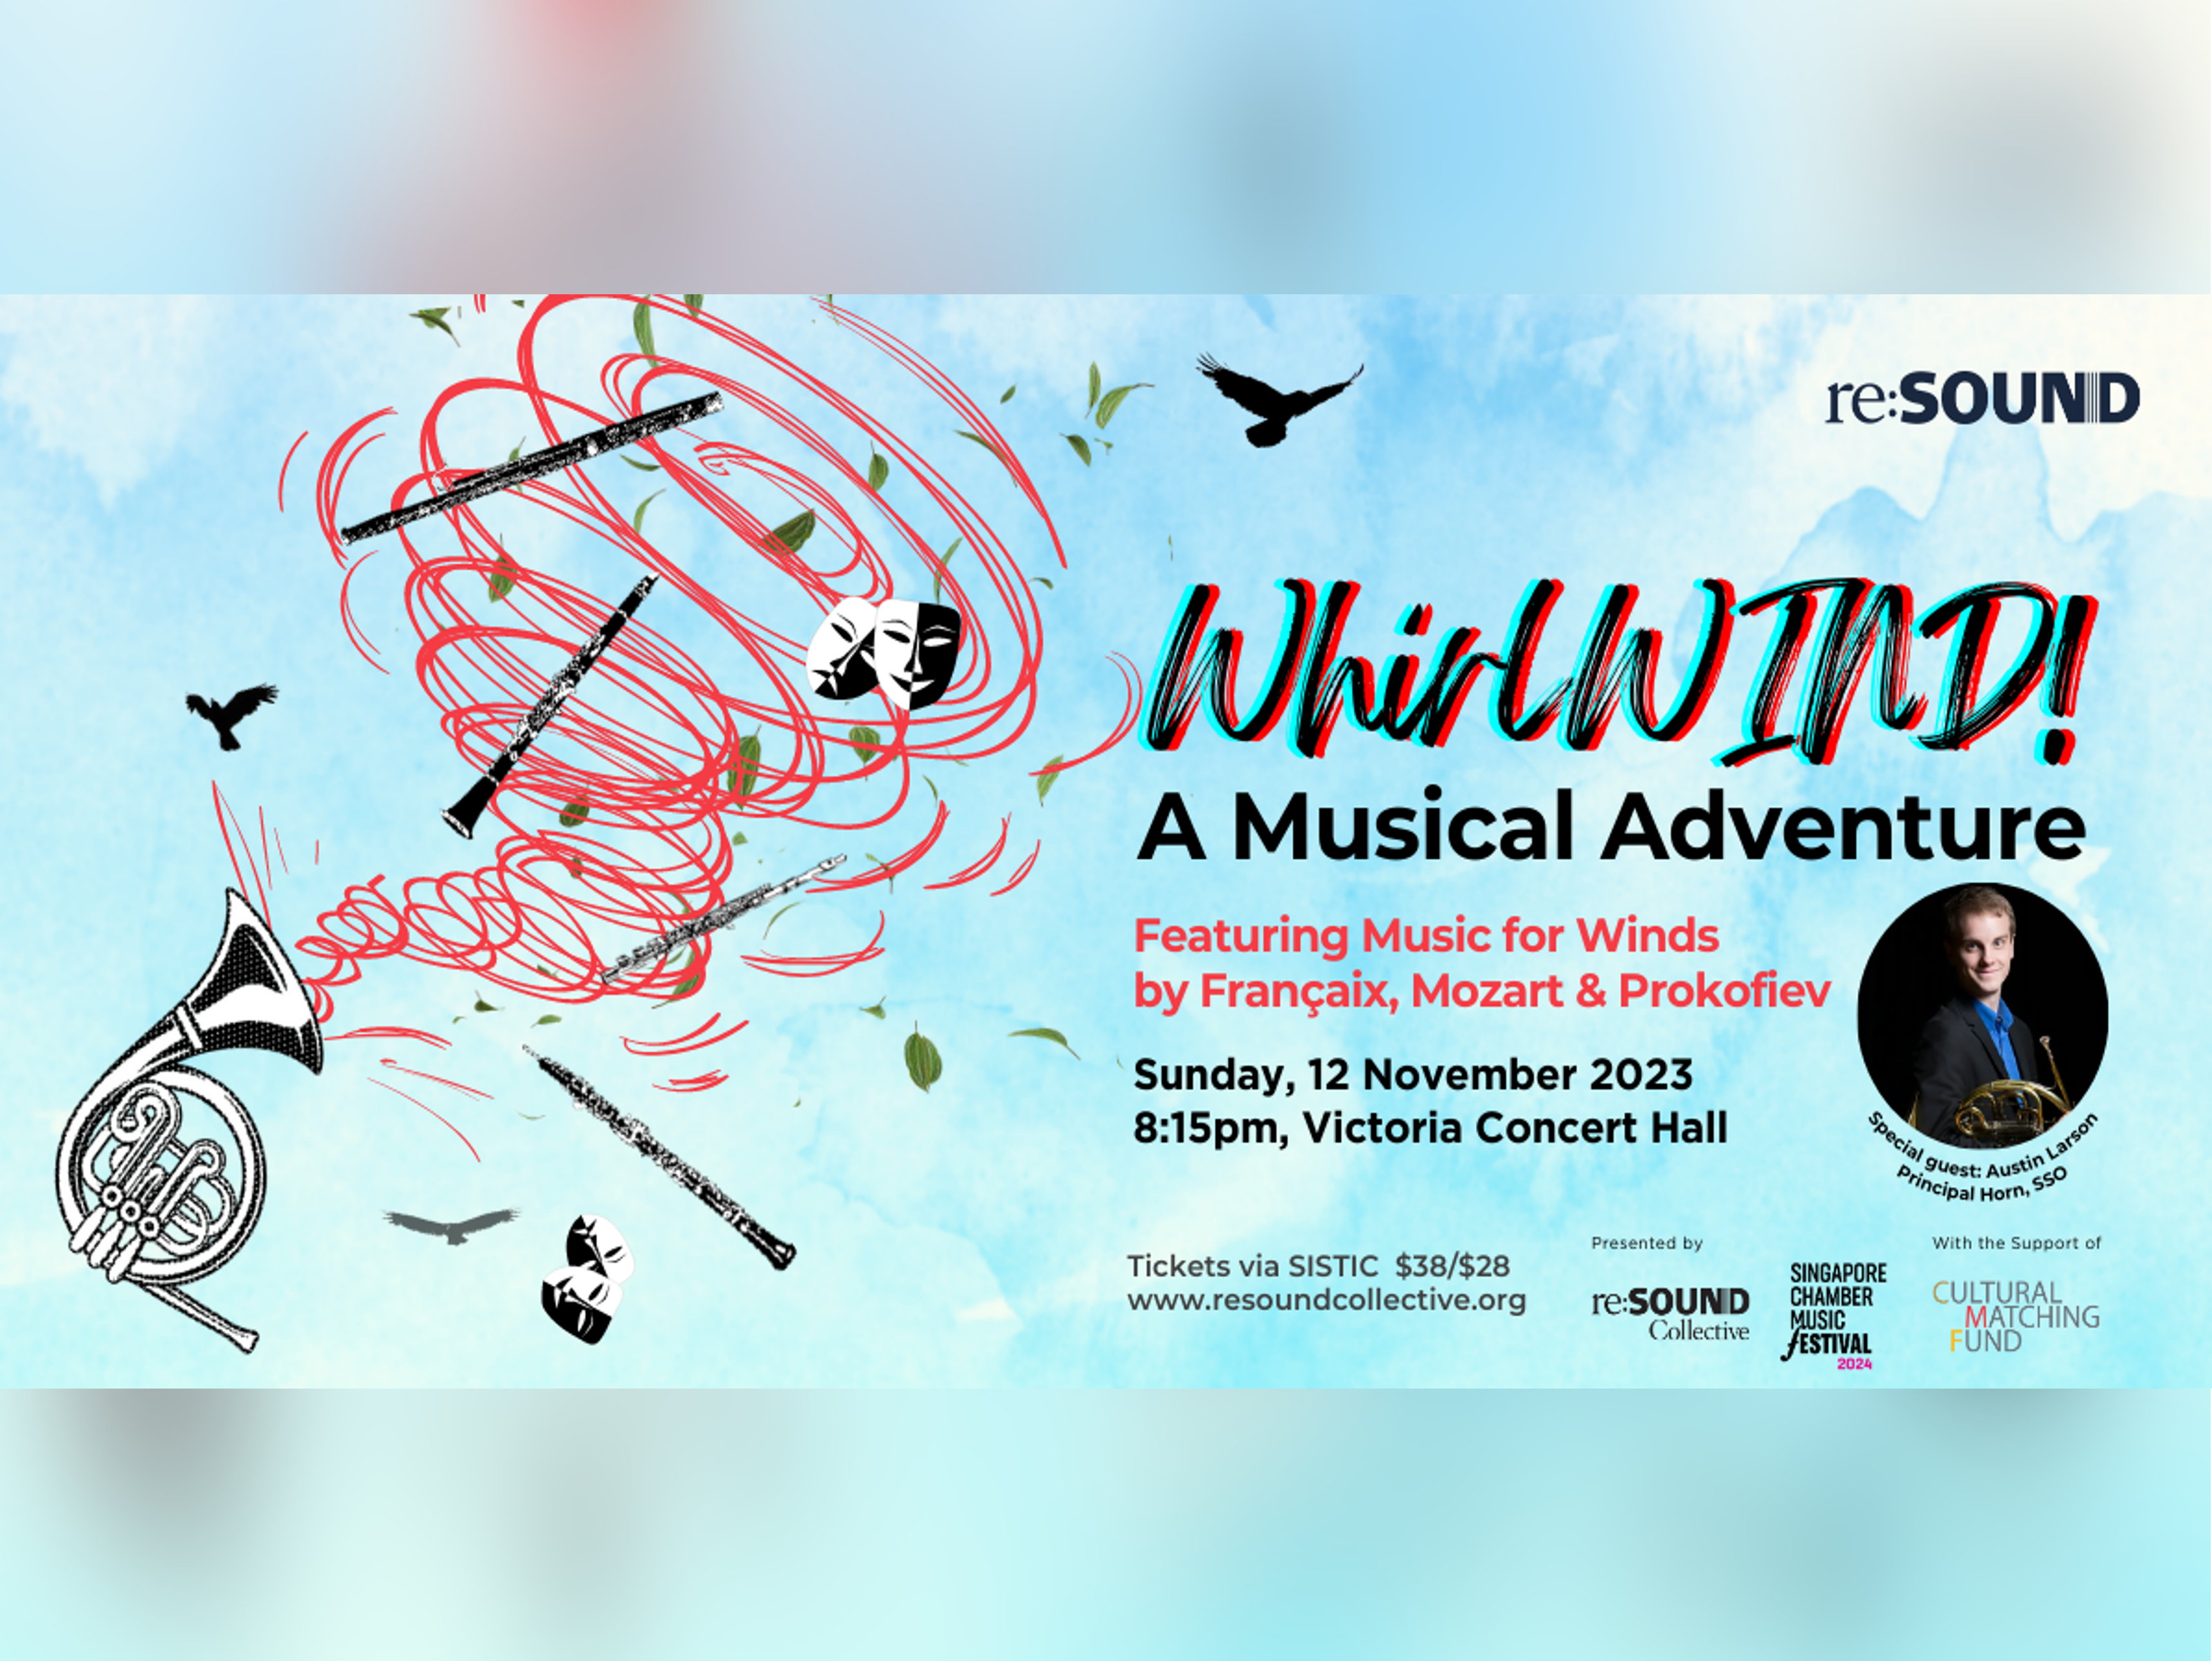 WhirlWIND! A Musical Adventure [G]